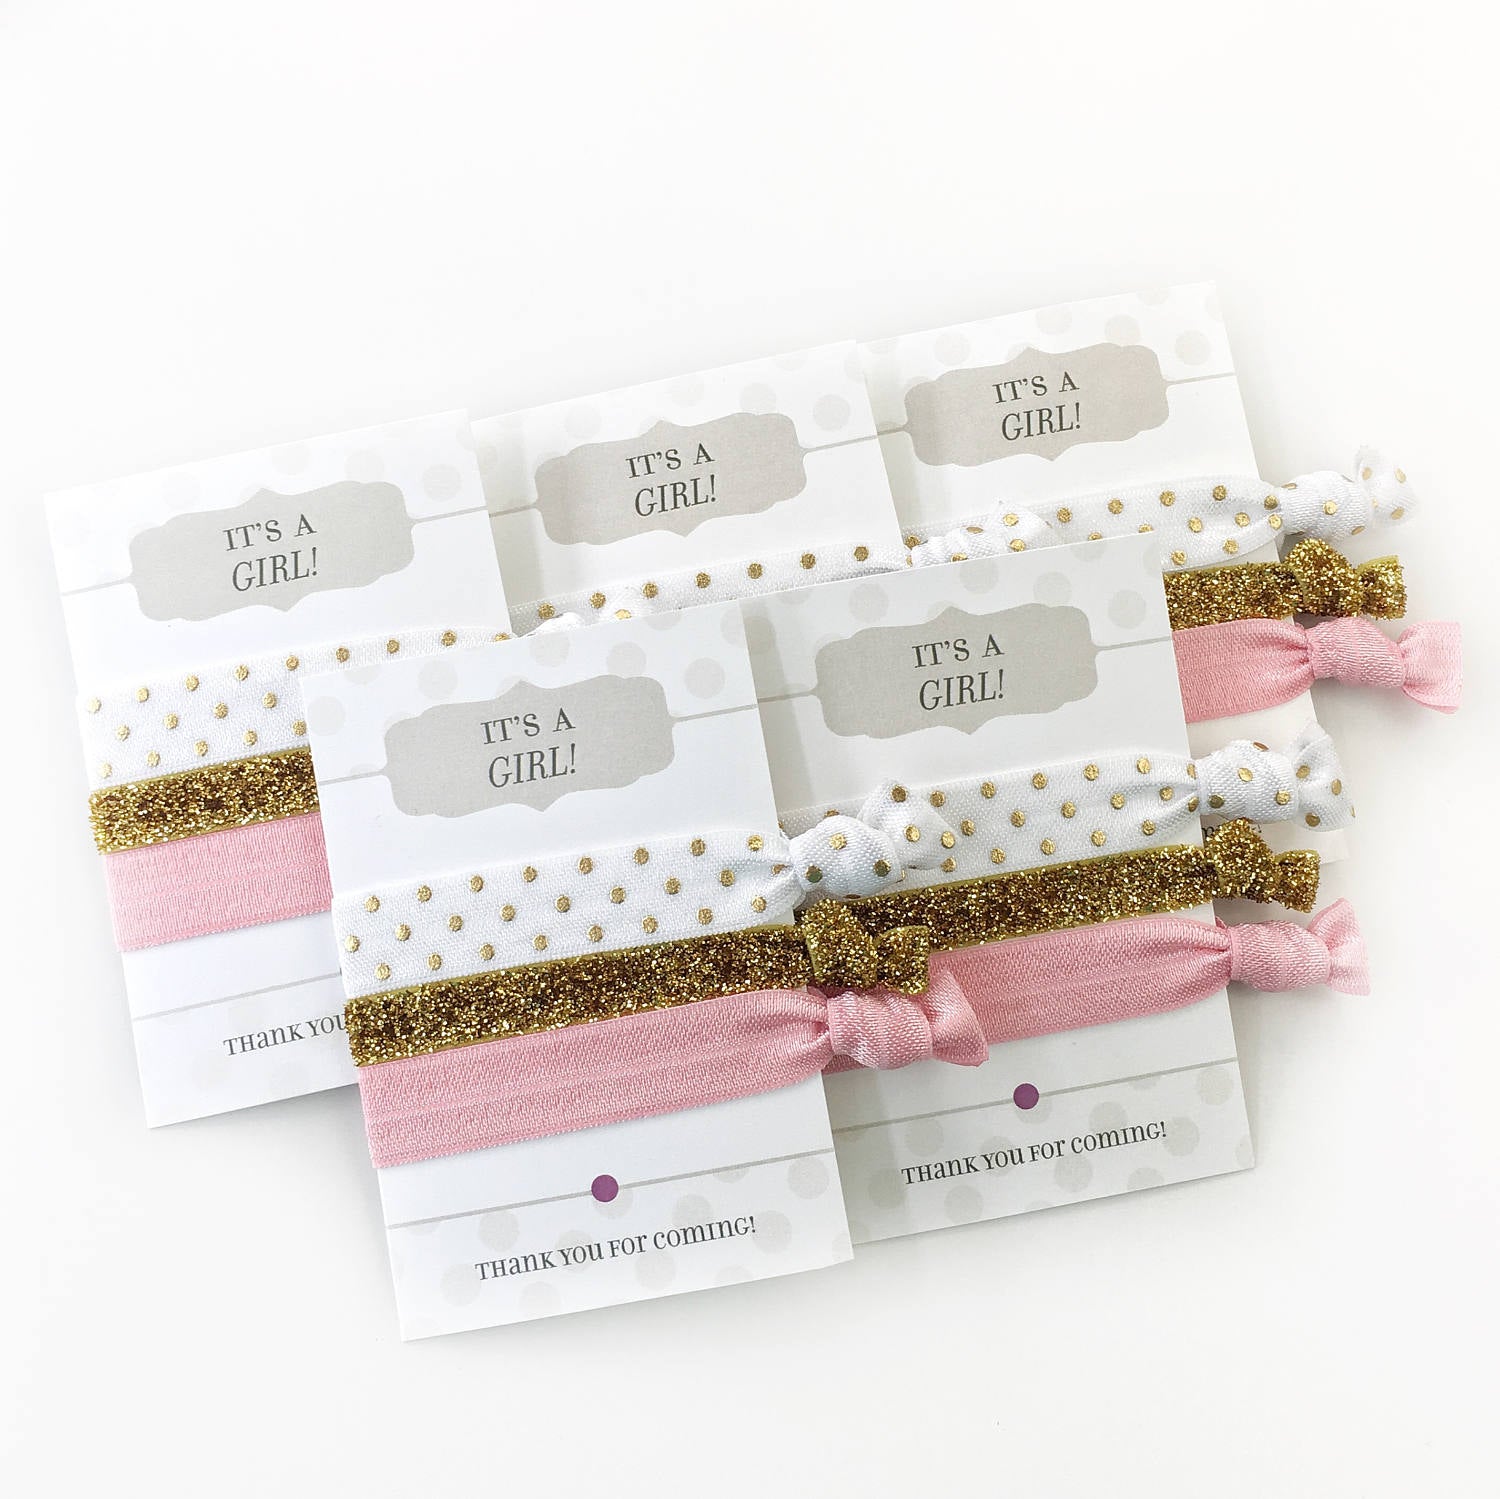 It's a Girl Baby Shower Favors - Pink Baby Shower Favors Girl - @PlumPolkaDot 